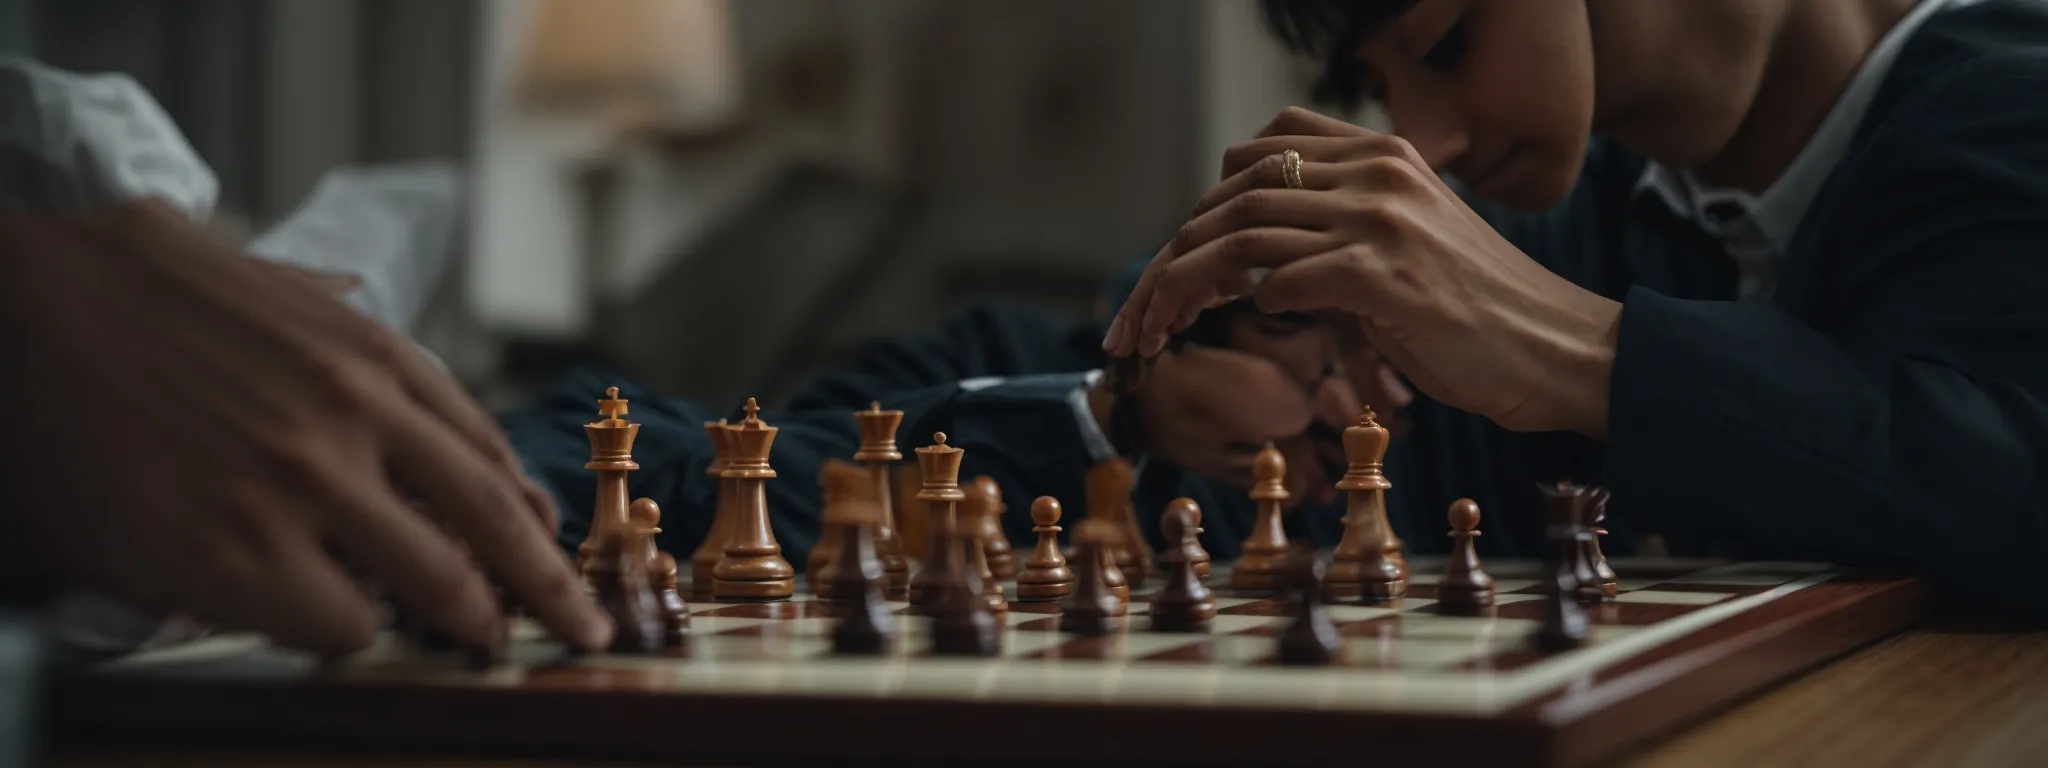 a chess player thoughtfully positions a piece on a strategic part of the board, symbolizing calculated moves in the game of link building.